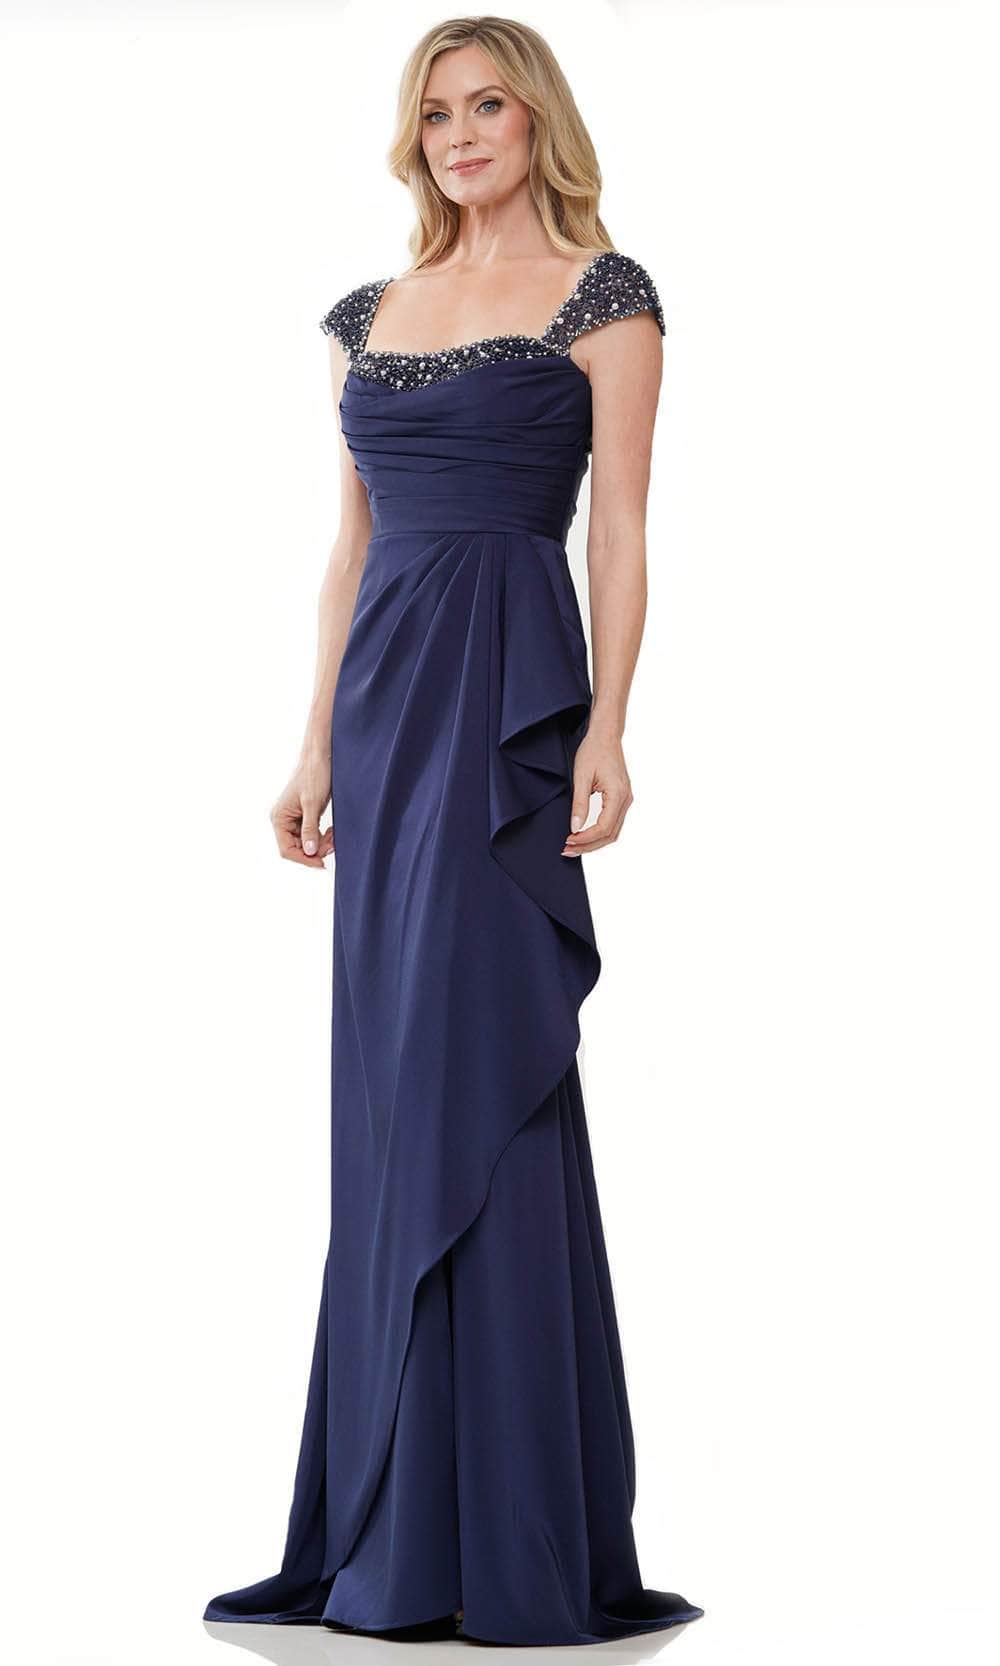 Marsoni by Colors MV1182 - Beaded Square Neck Evening Gown
